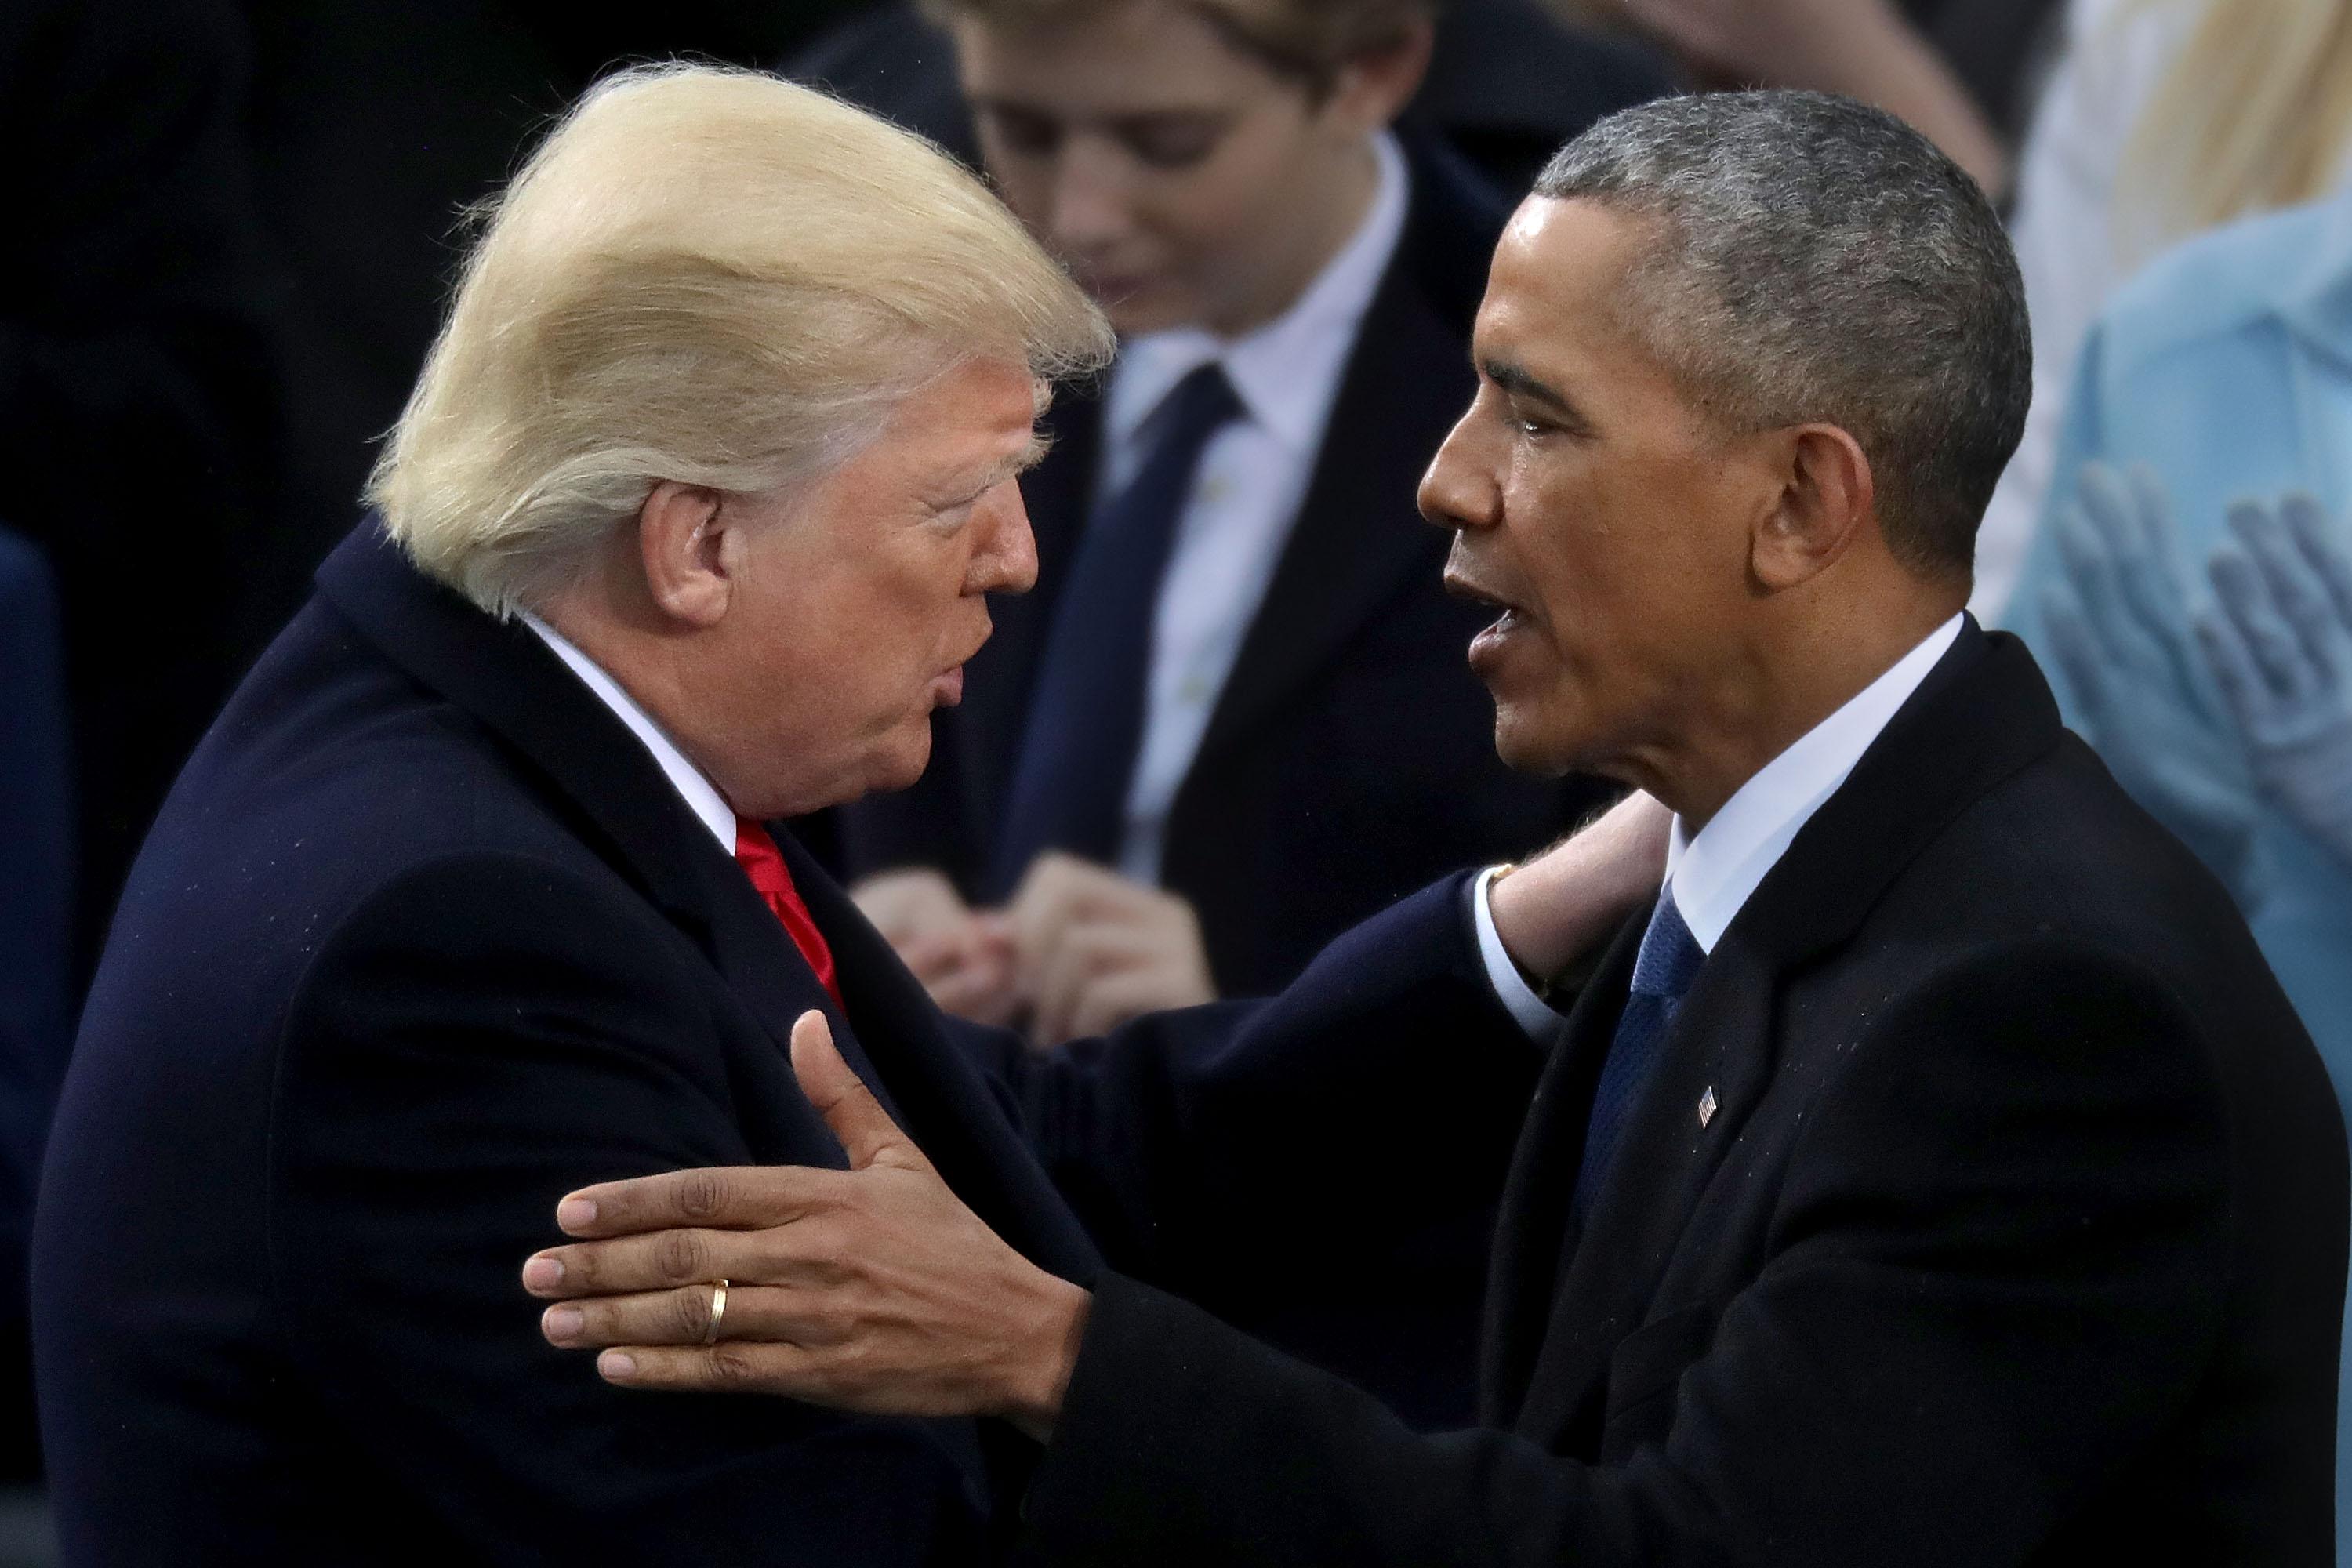 Trump and Obama touch each other's shoulders while speaking face to face.